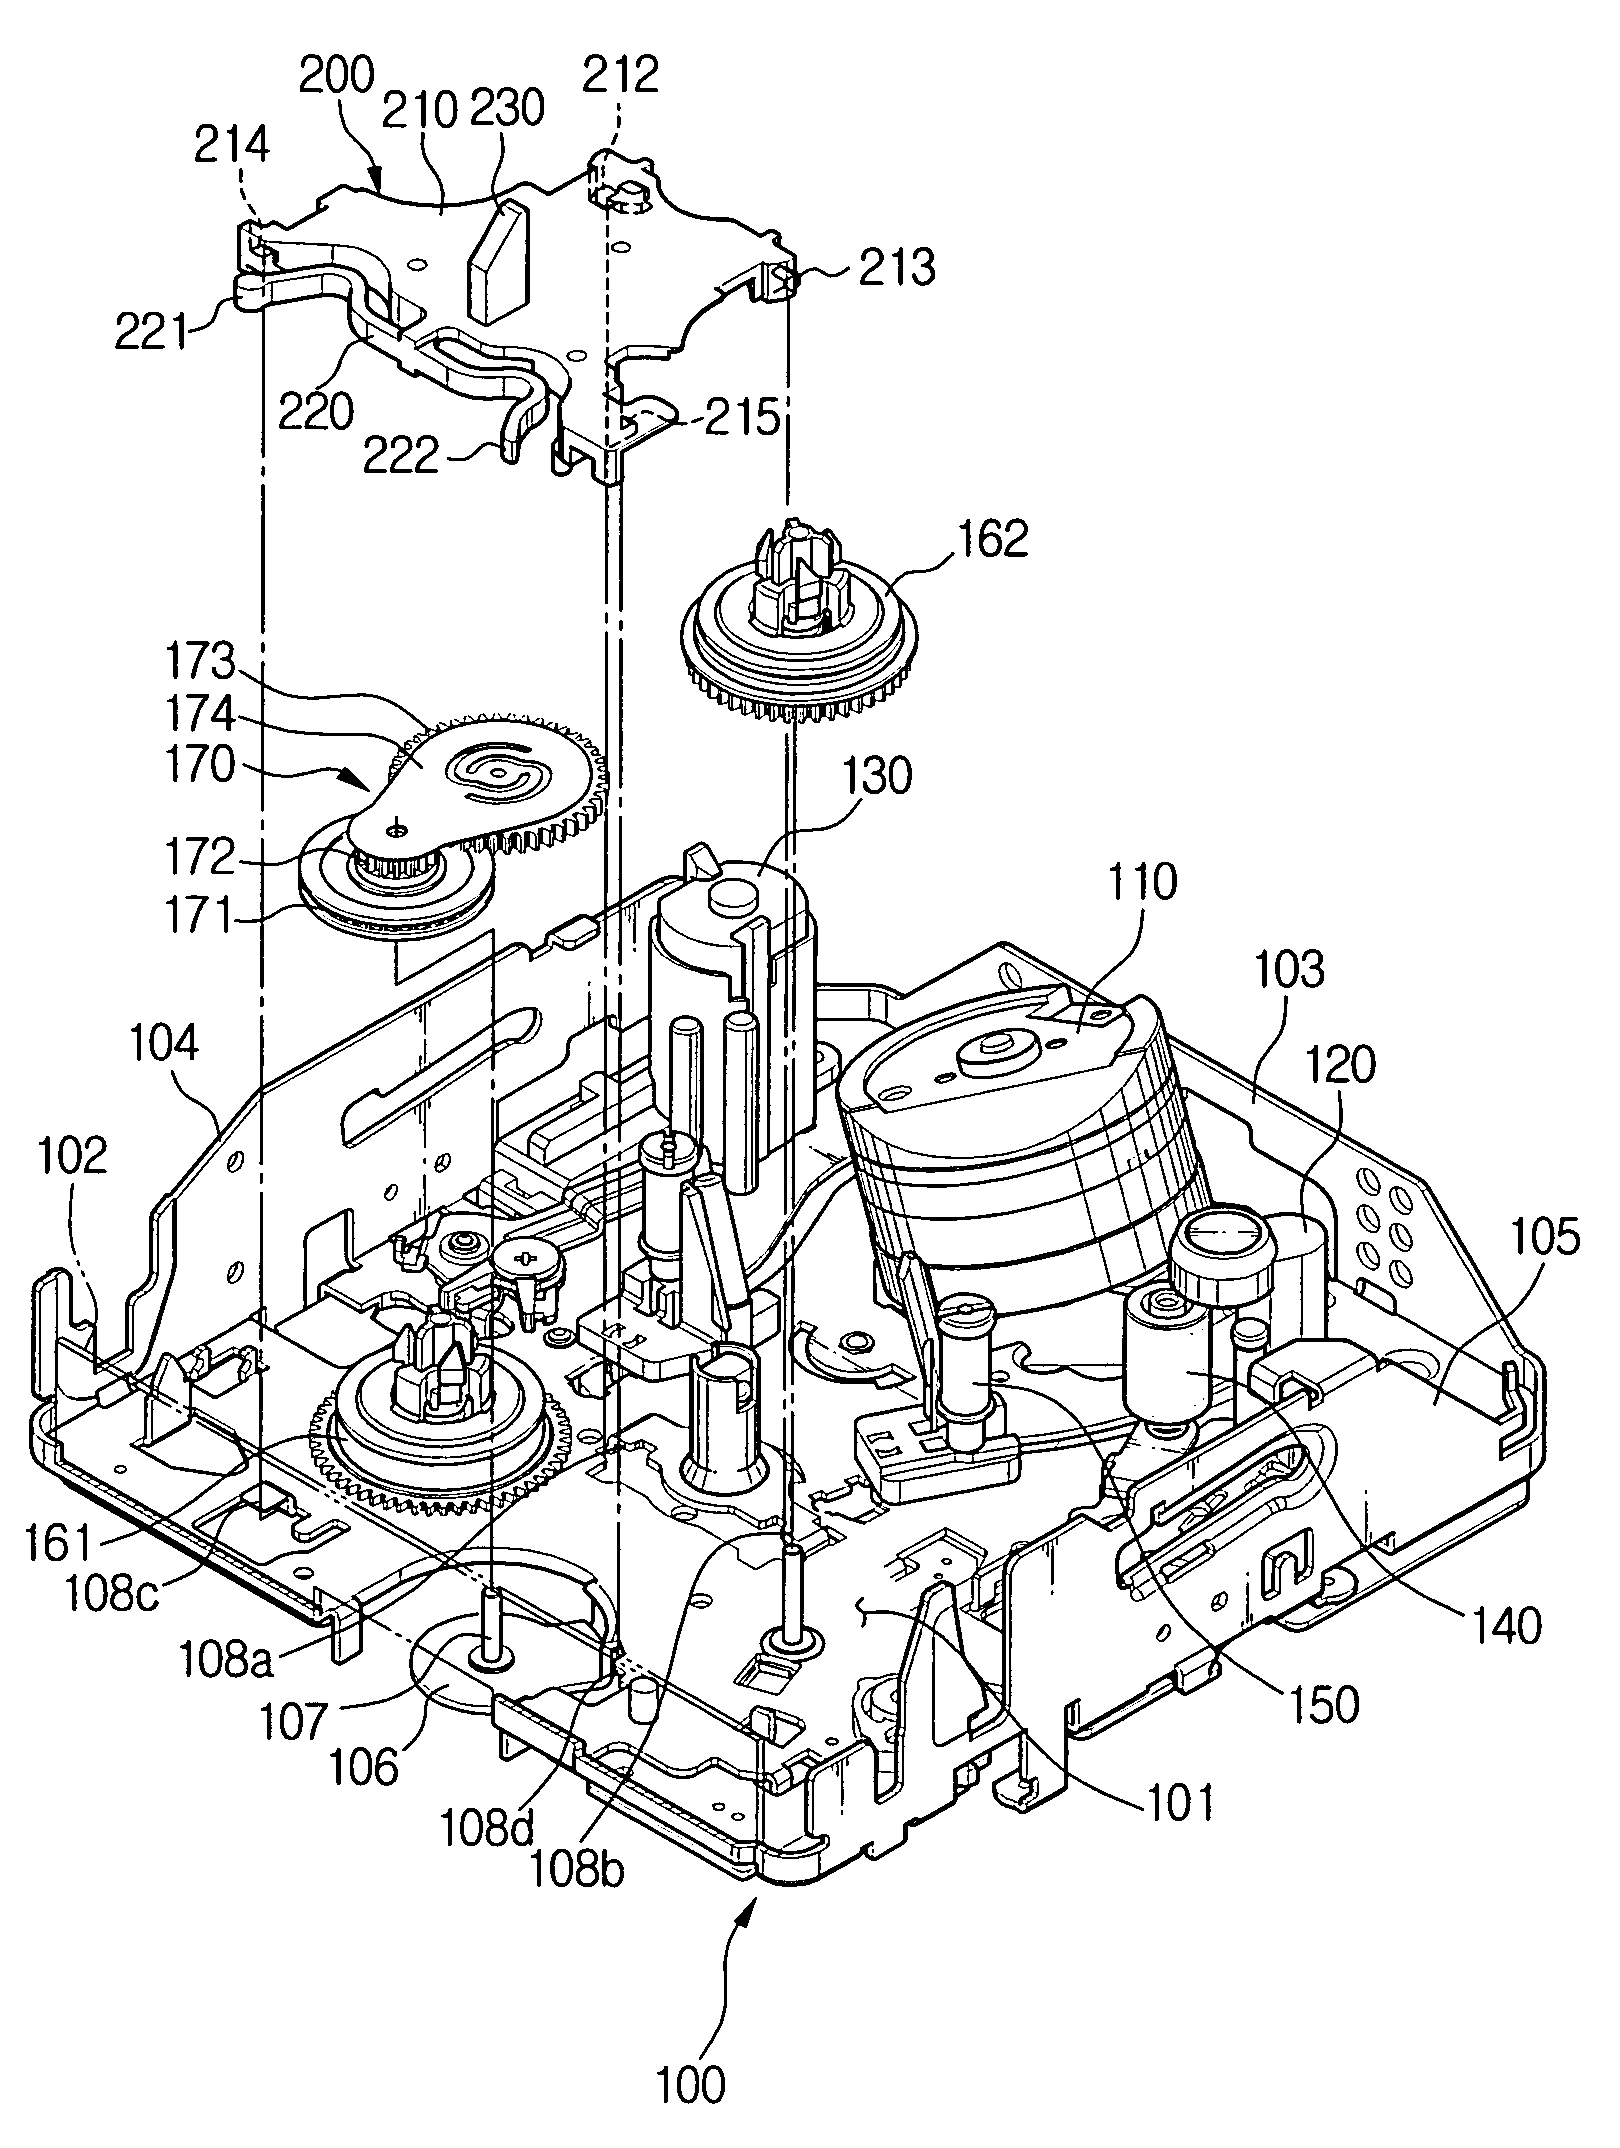 Reel cover of magnetic recording/reproducing apparatus, and a method of manufacturing thereof